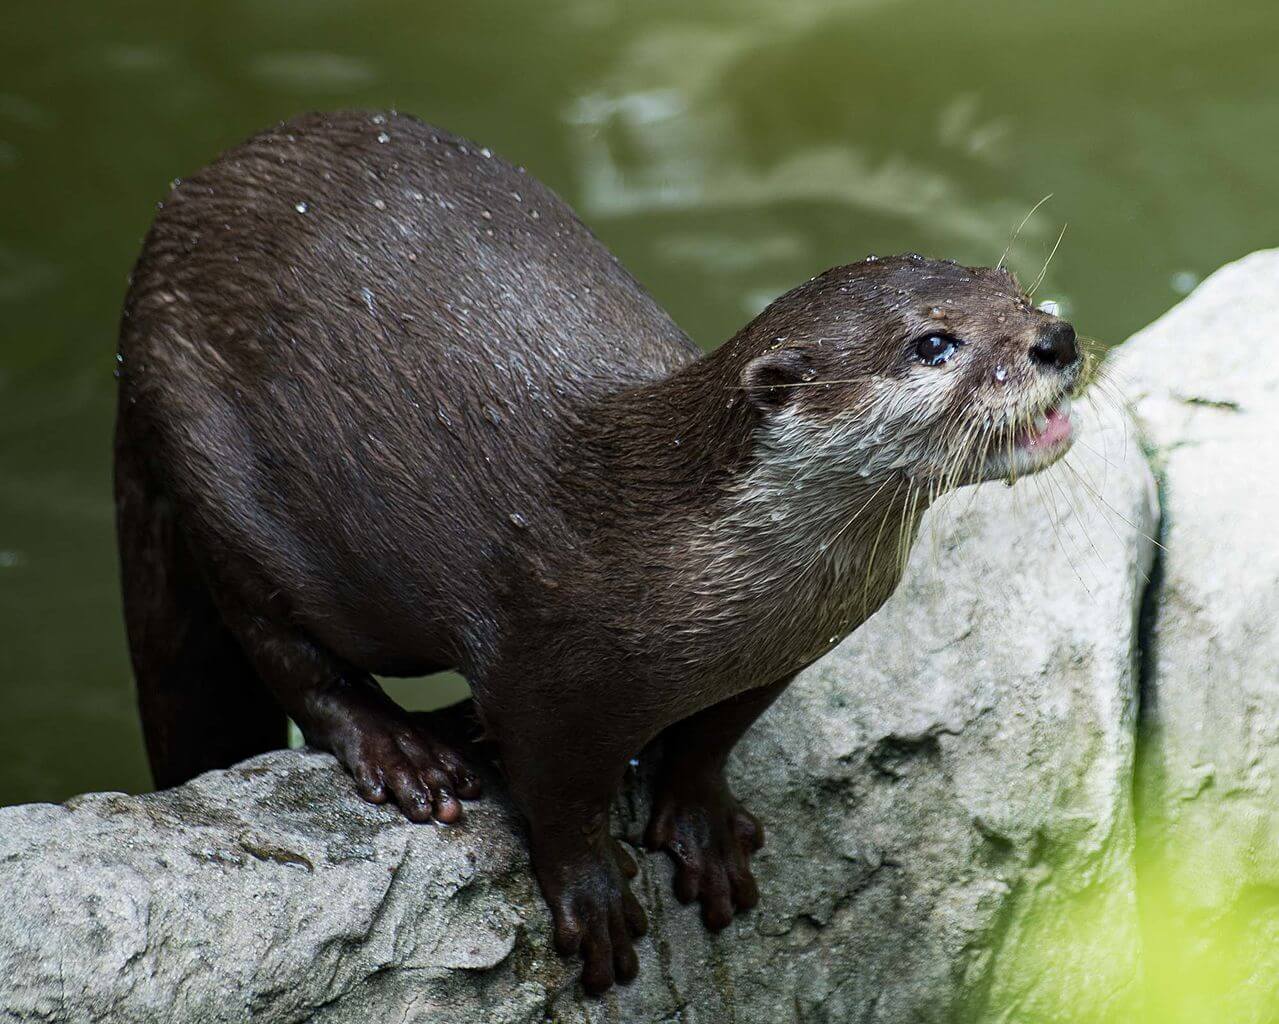 A Hairy-nosed otter standing on a rock sticking out the water.